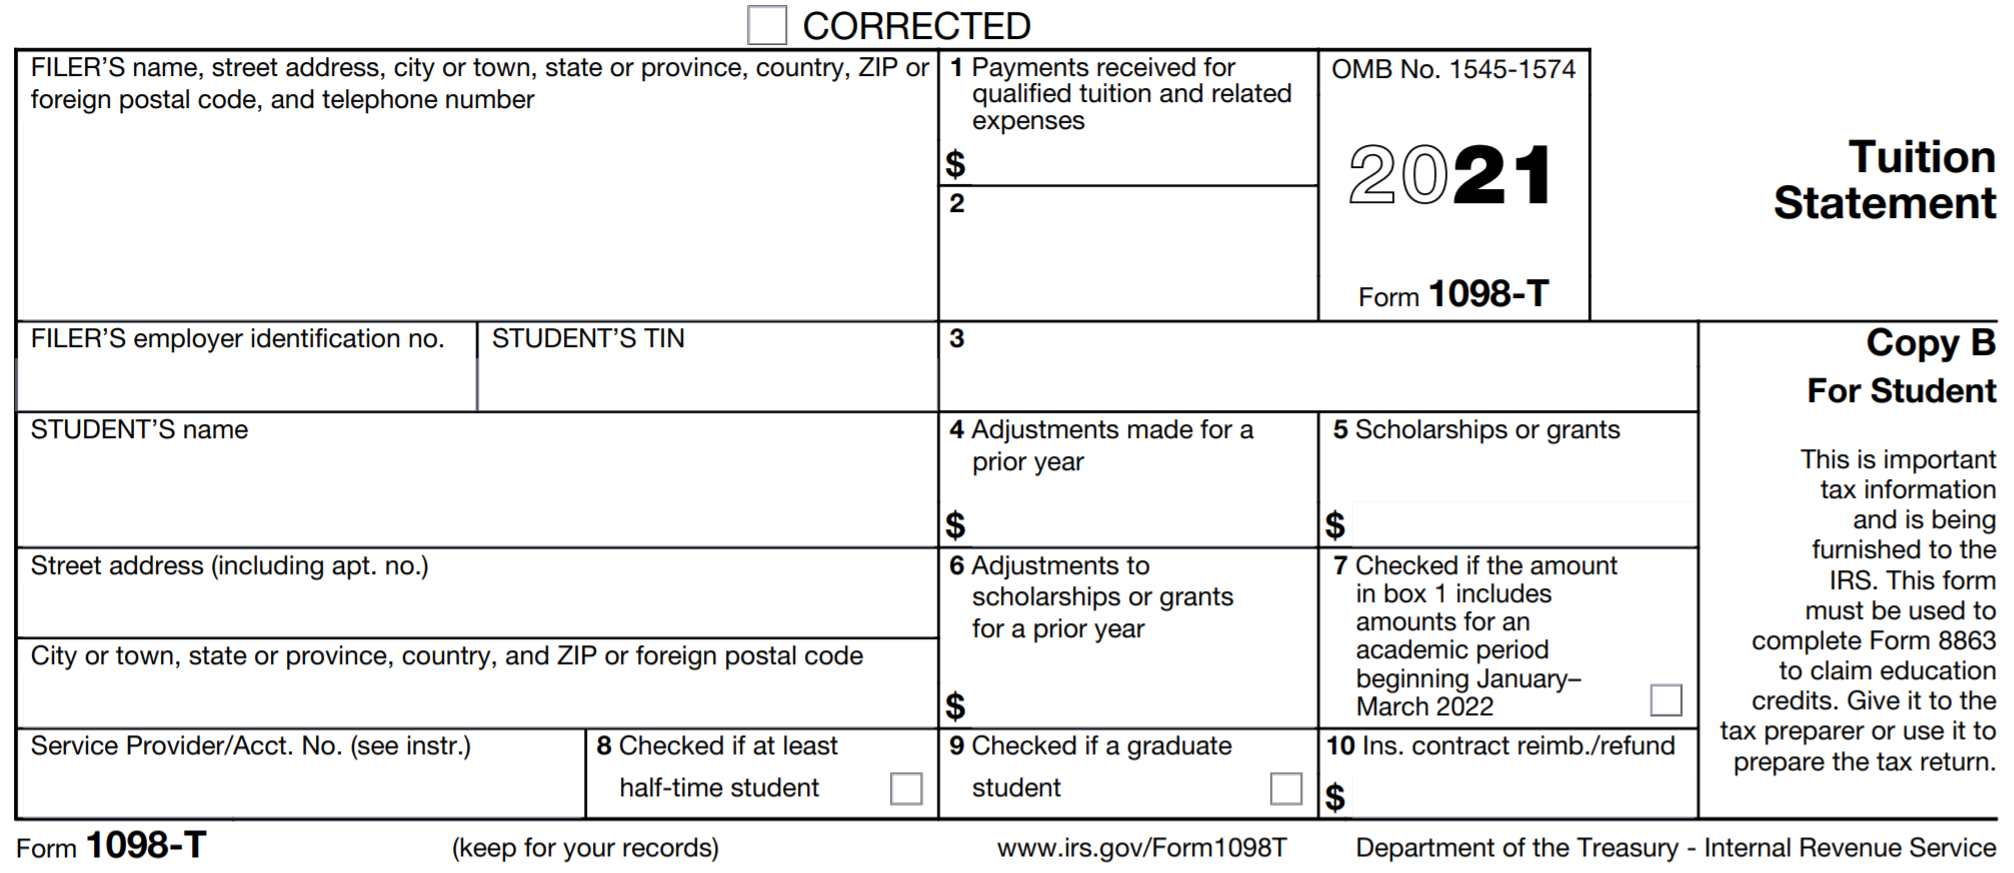 education-credits-and-deductions-form-1098-t-support